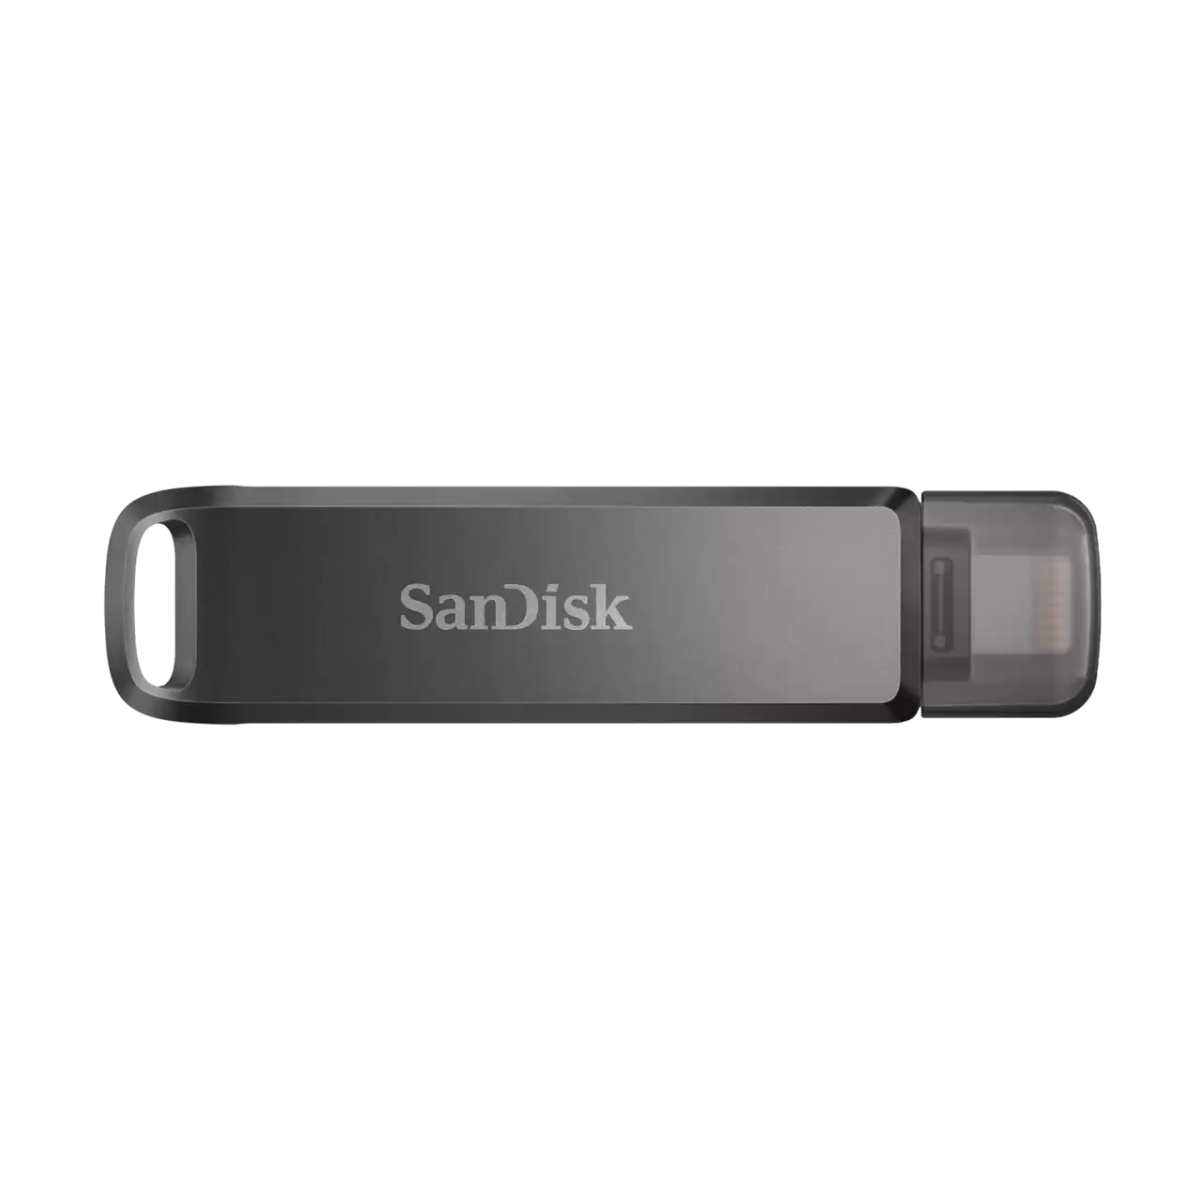 SanDisk iXpand Flash Drive Luxe/256GB/90MBps/USB 3.0/Lightning + USB-A